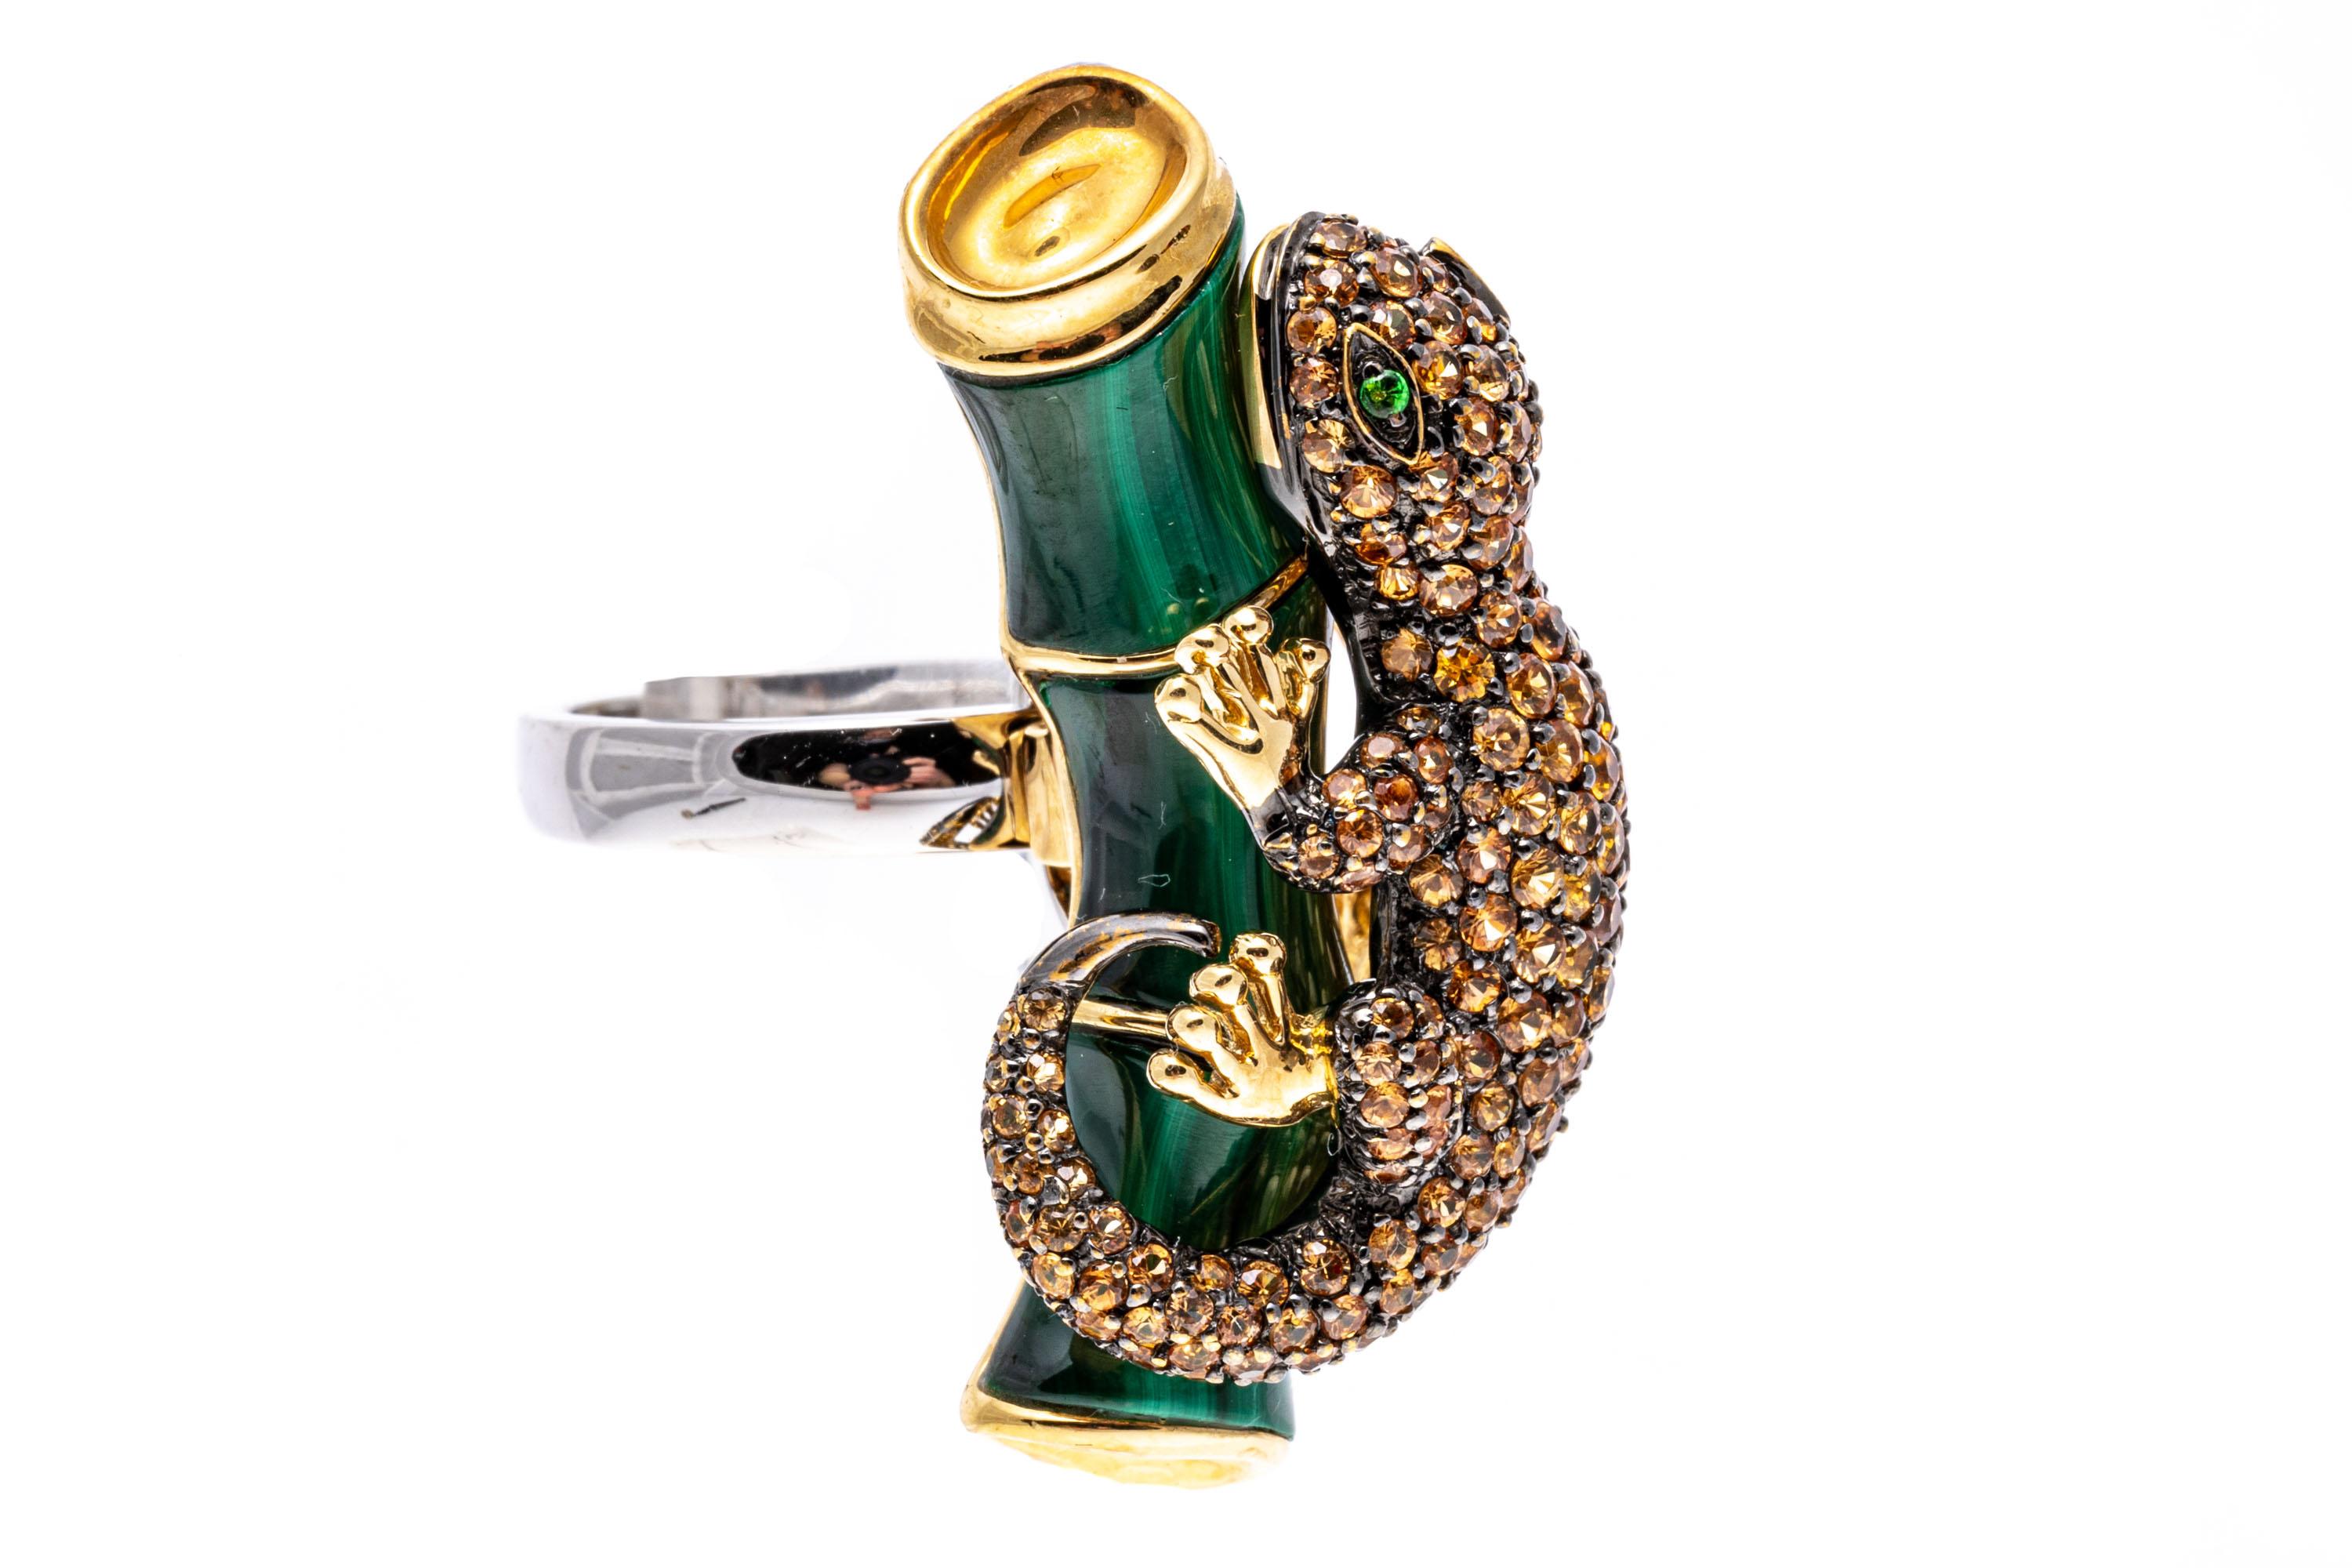 18k Gold Pave Topaz Salamander Ring/Pendant With Malachite For Sale 5